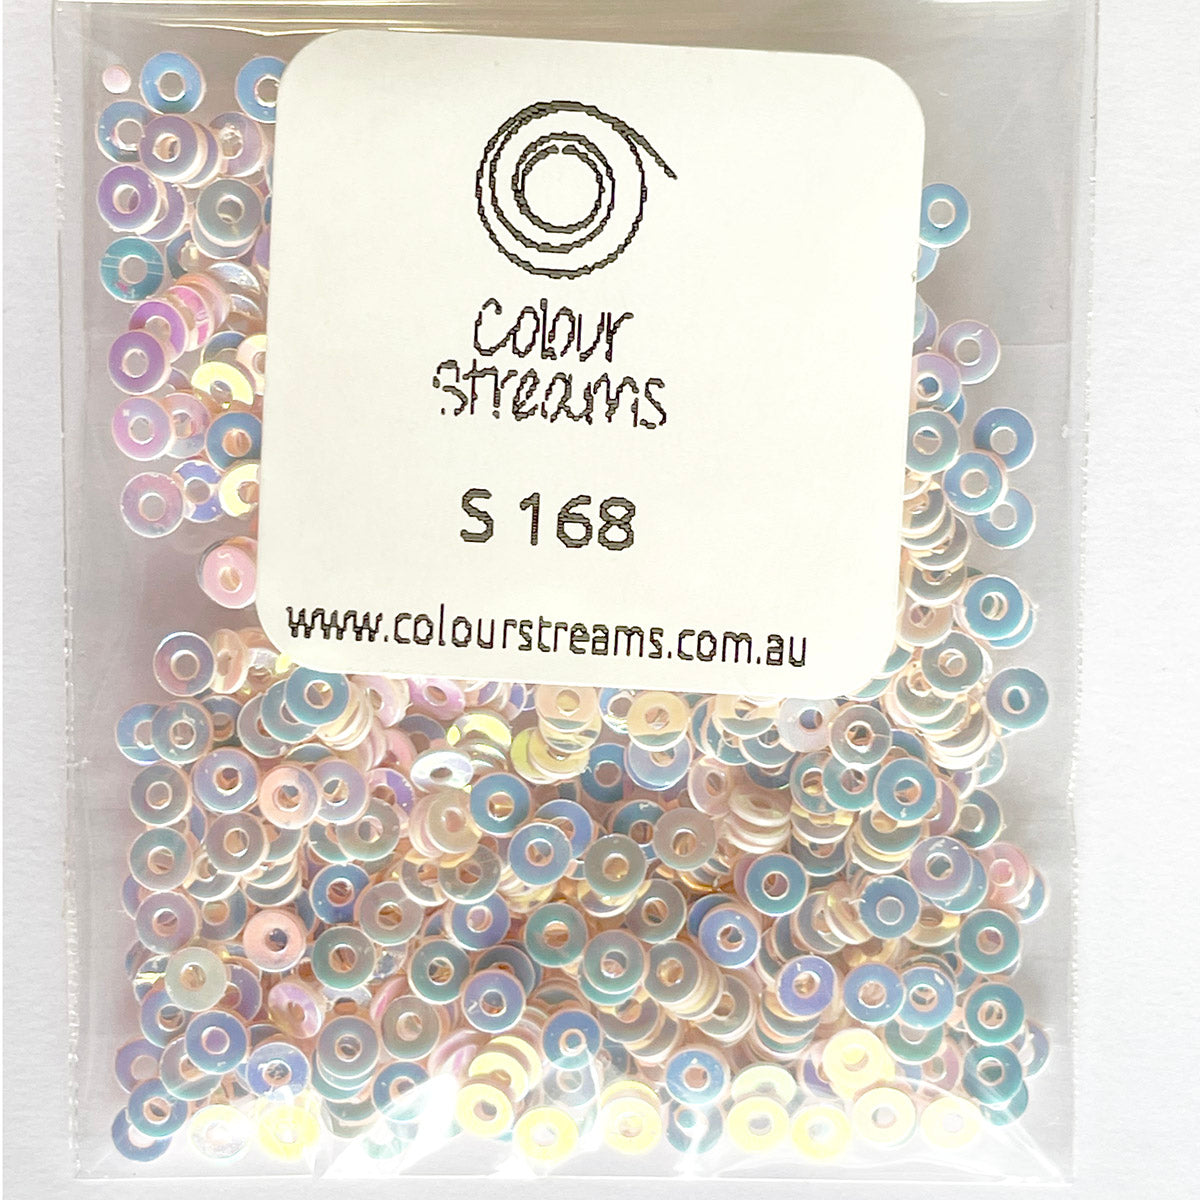  www.colourstreams.com.au Colour Streams Sequins Embellishments Stitching Embroidery Costumes Mardi Gras Dancing Ballet Theatre Shows Drag Queen Bling Iridescent Luminous Sequins Flat Circle 3mm Pale Pink with Mauve and Pale Blue Lights S168